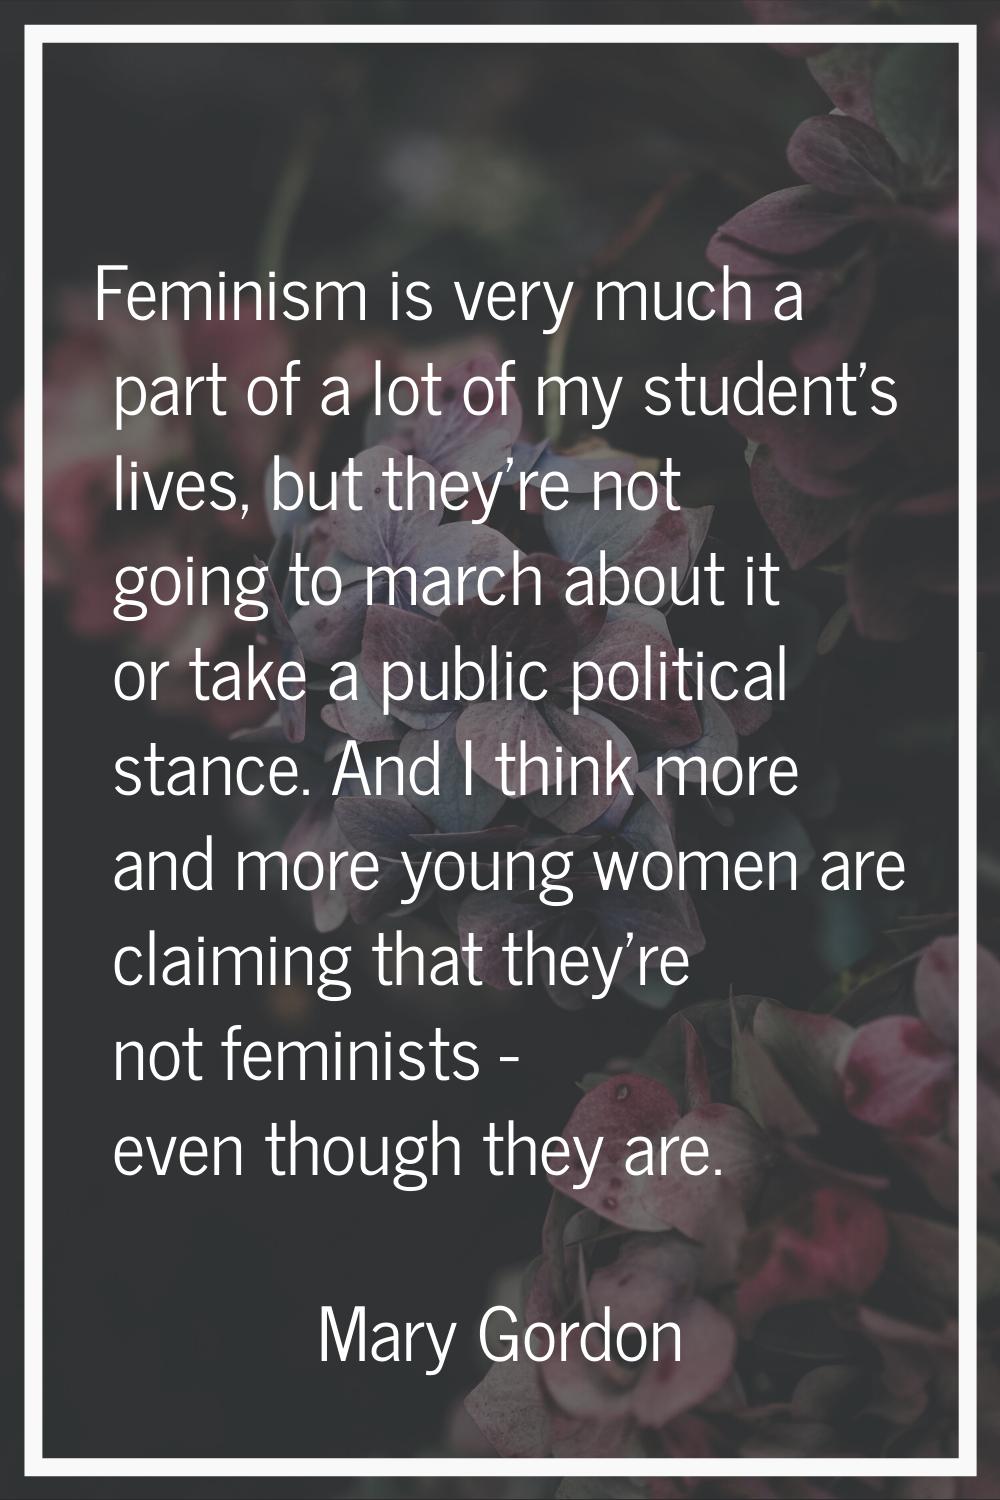 Feminism is very much a part of a lot of my student's lives, but they're not going to march about i